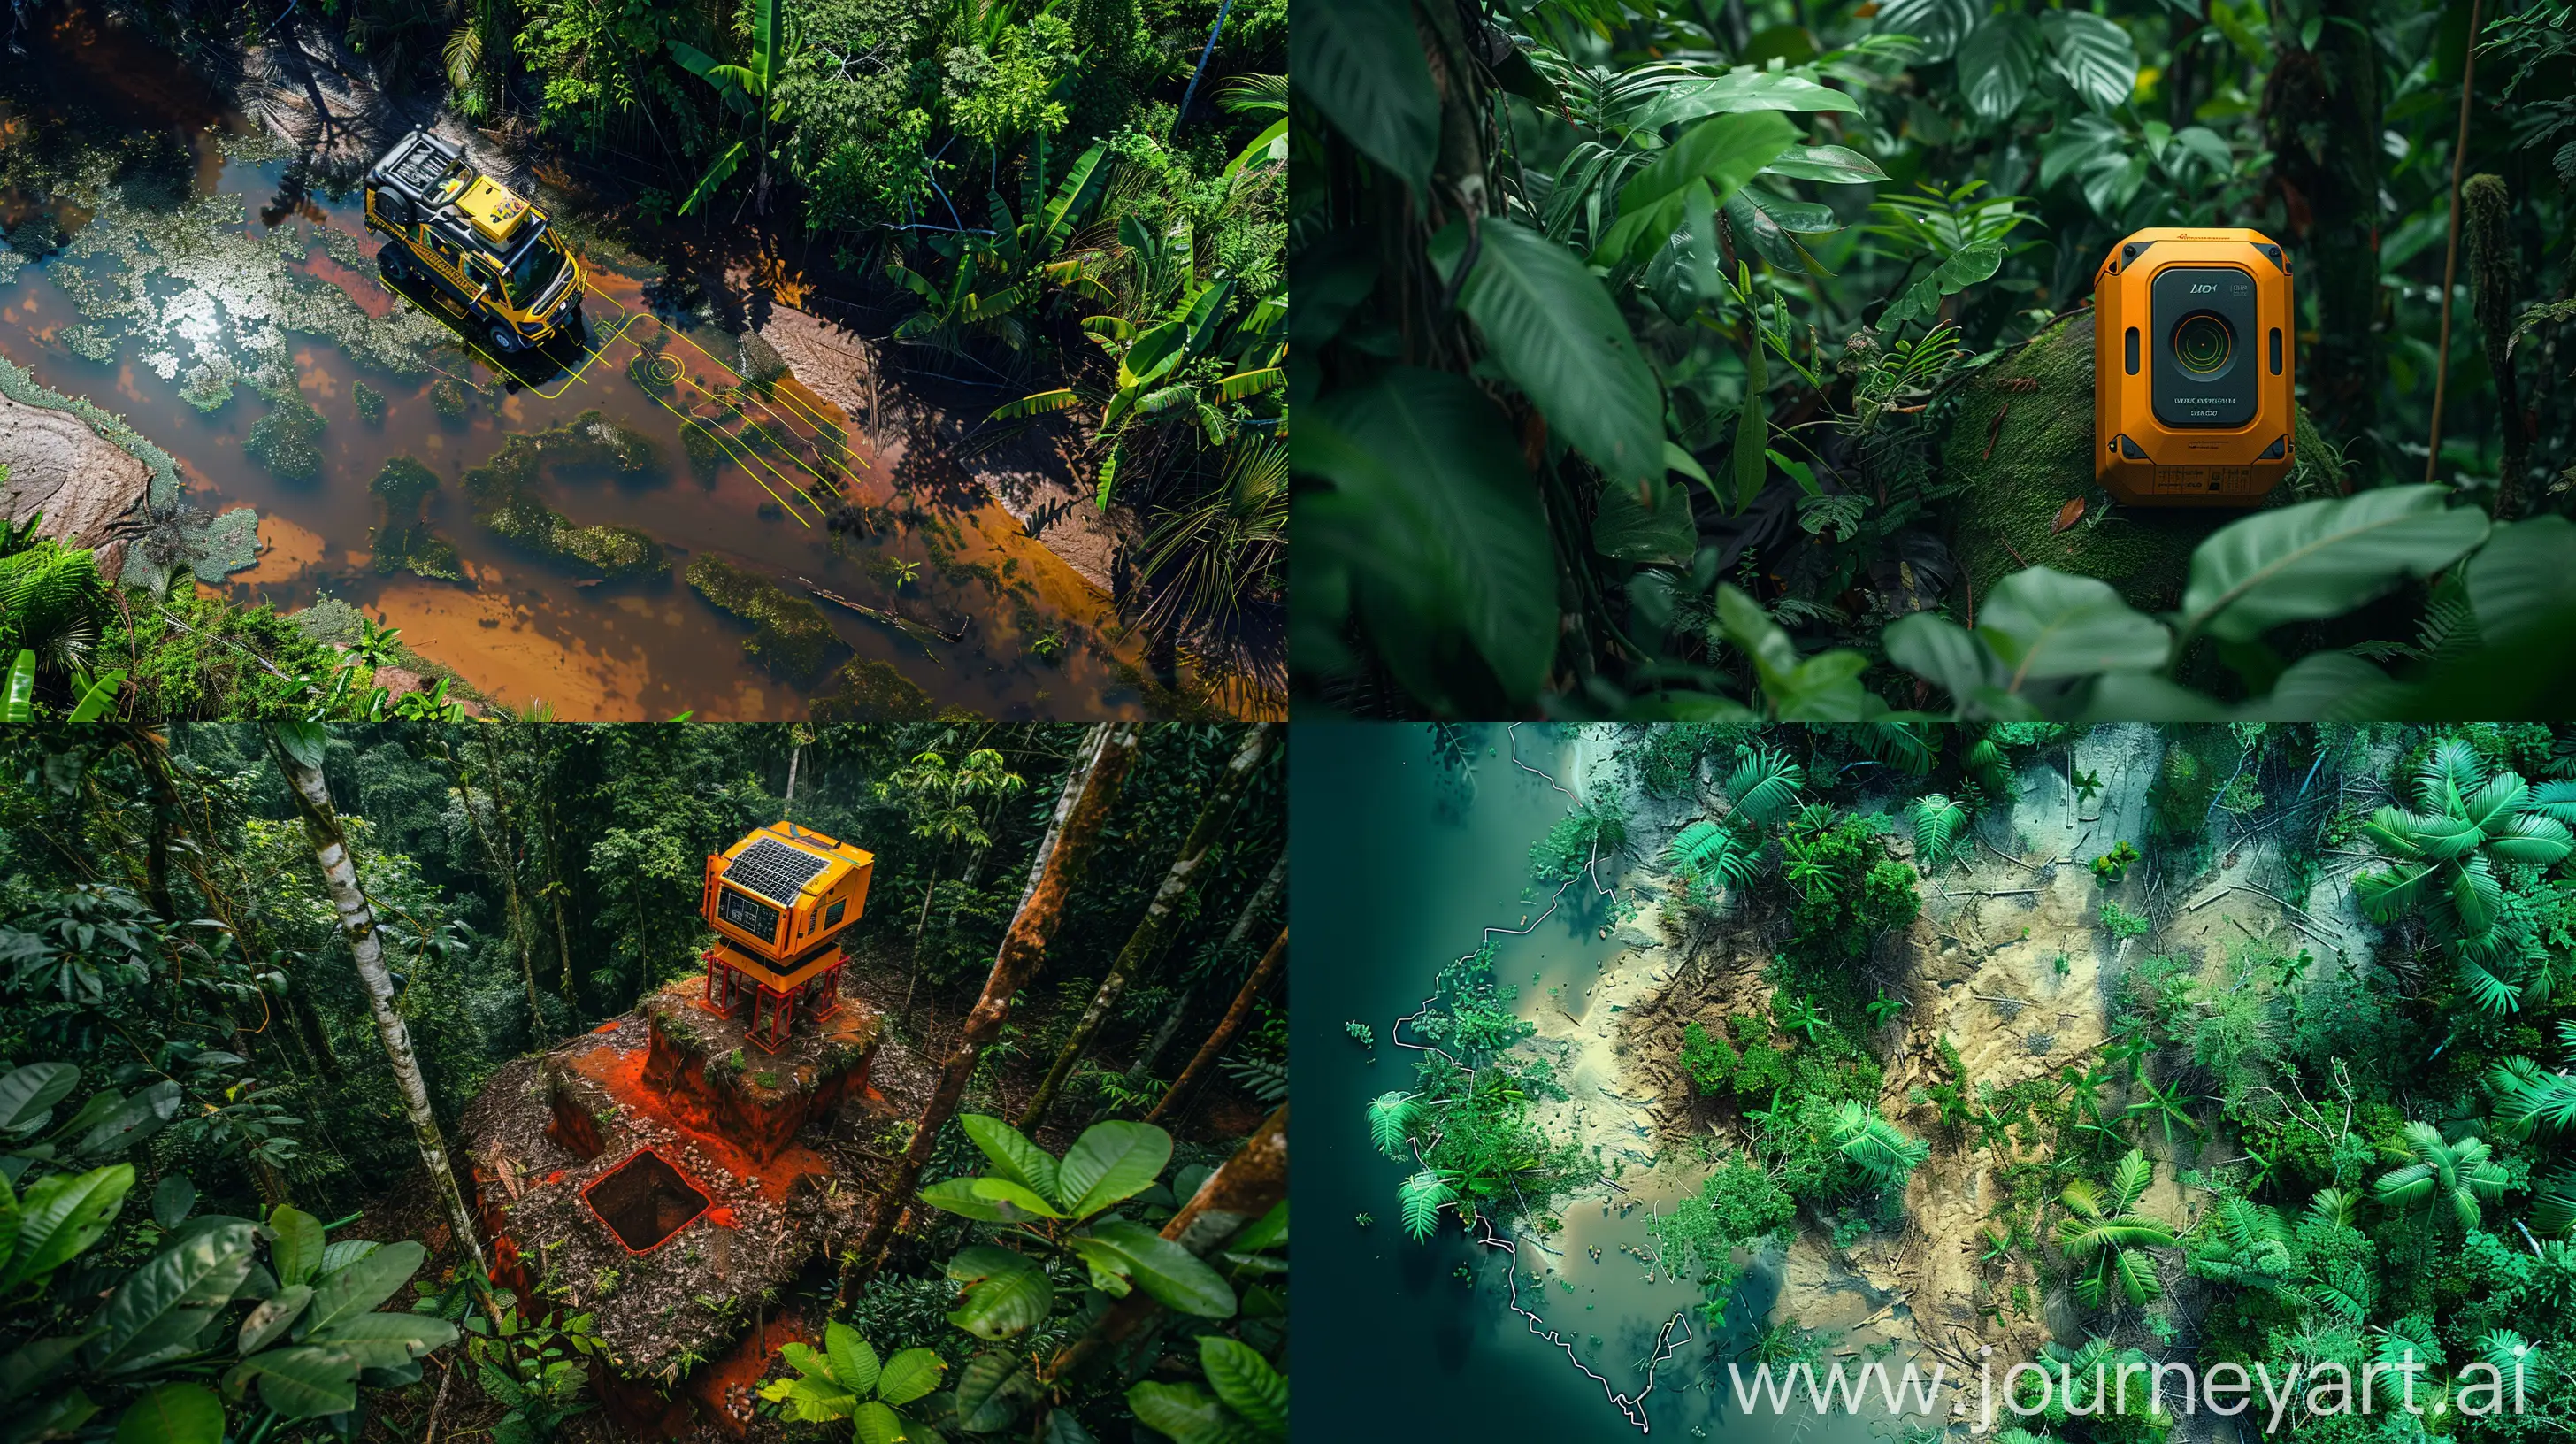 lidar device meticulously mapping the Amazon rainforest, intricate details of foliage and fauna, technology meets nature, cutting-edge scientific equipment in action, vibrant ecosystem captured with precision, birds-eye view --ar 16:9 --v 6 --s 300 --c 15